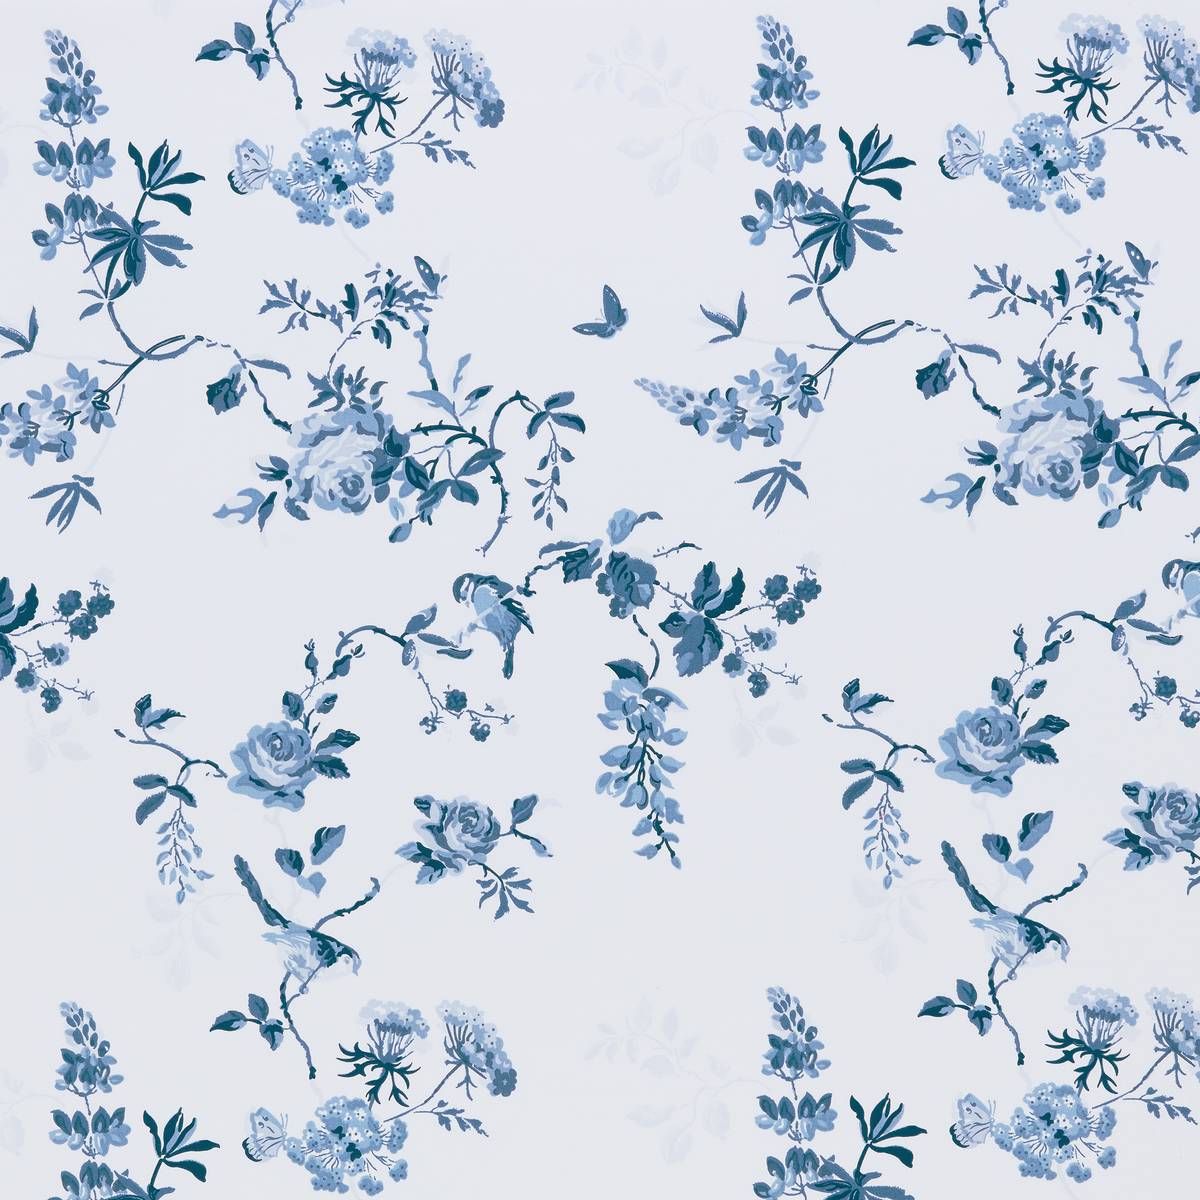 Birds & Roses Blue Fabric by Cath Kidston